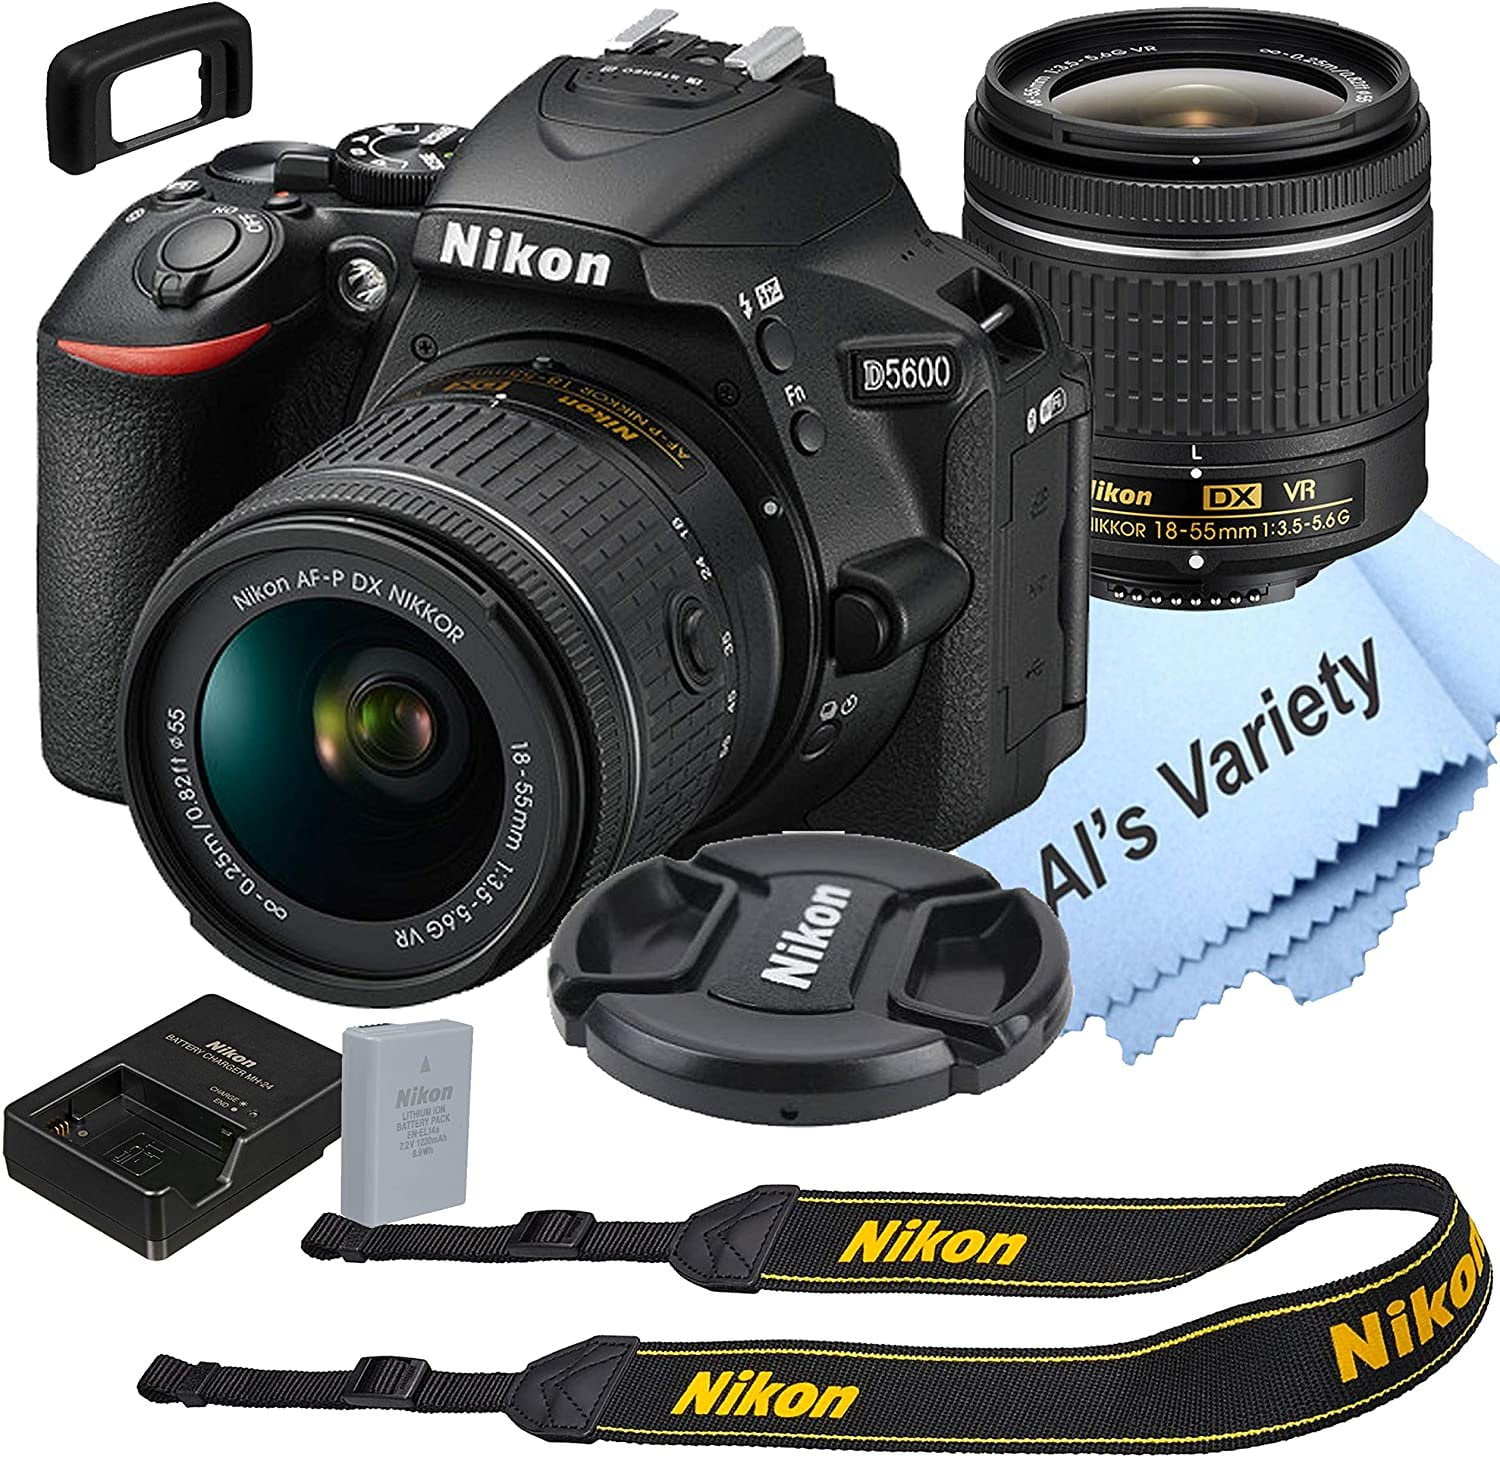 Nikon D5600 DSLR Camera Kit with 18-55mm VR Lens Built-in Wi-Fi 24.2 MP  CMOS Sensor EXPEED 4 Image Processor and Full HD 1080p Video Recording at  60 